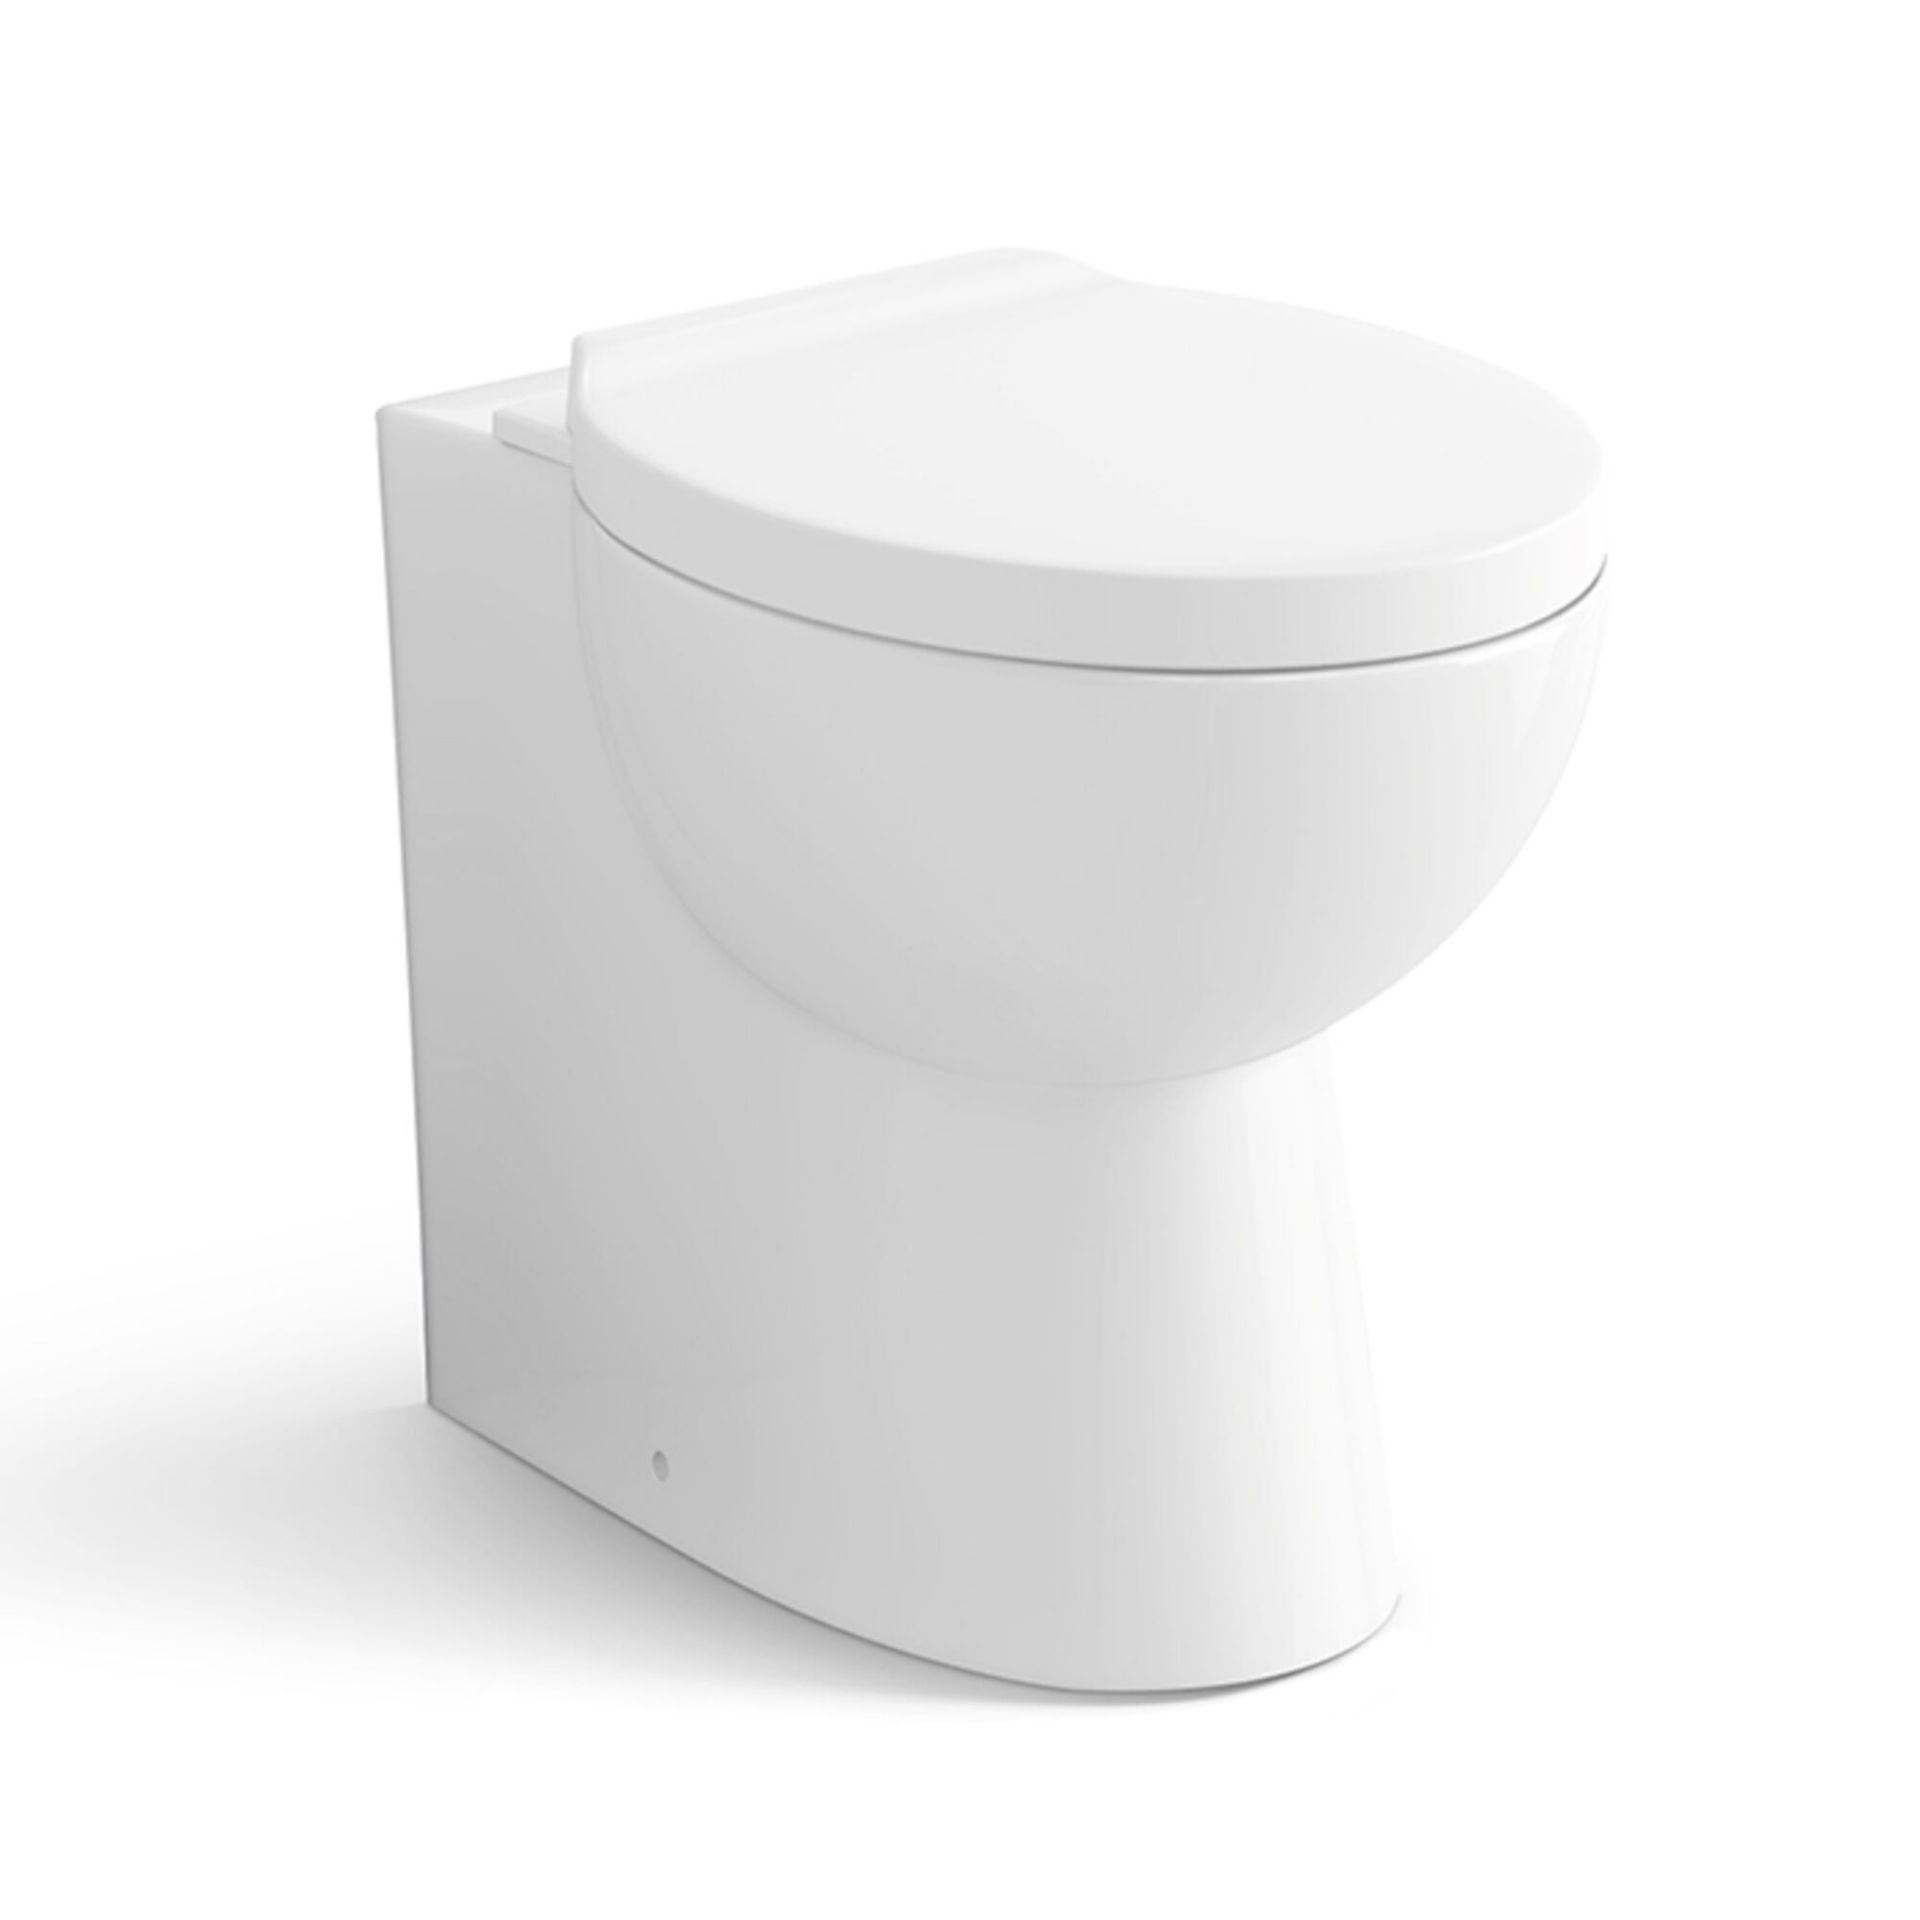 Quartz Back to Wall Toilet & Soft Close Seat. Stylish design Made from White Vitreous China Fin...